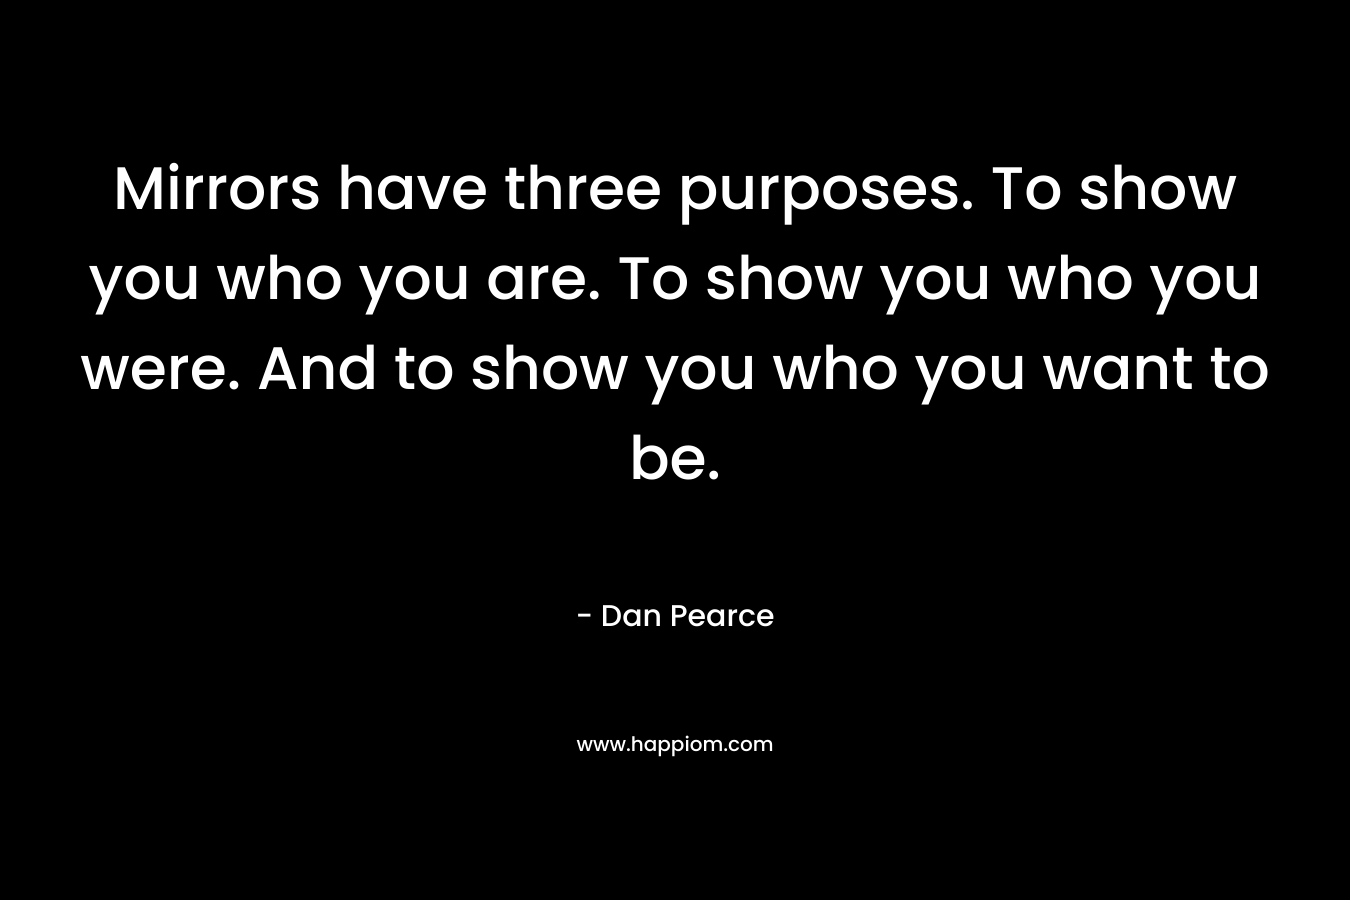 Mirrors have three purposes. To show you who you are. To show you who you were. And to show you who you want to be.